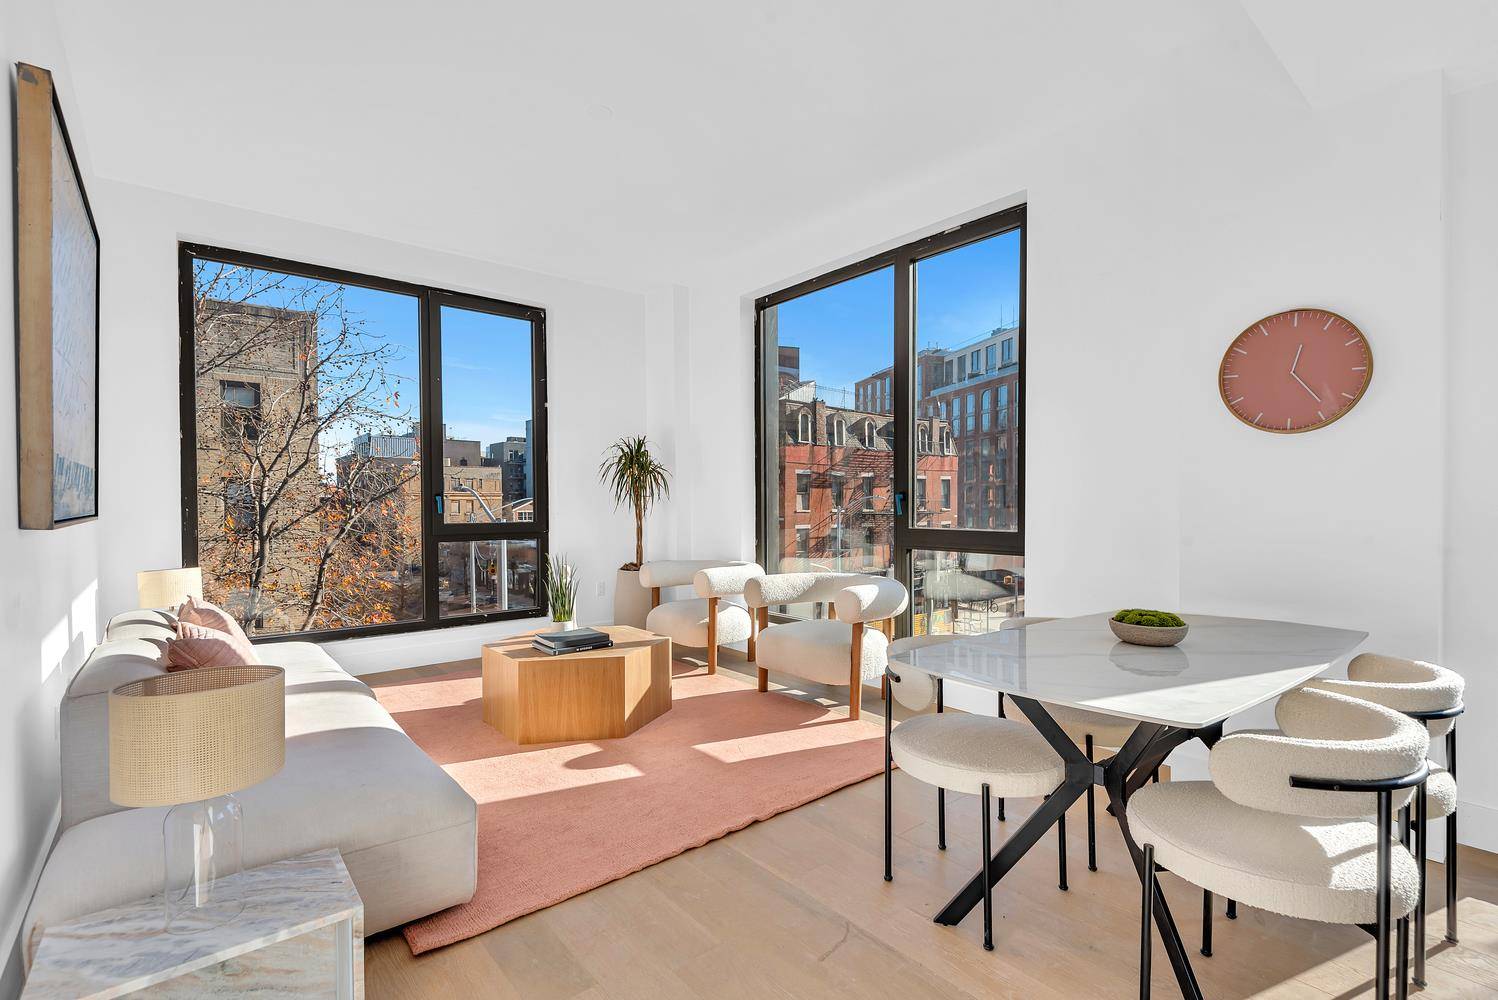 Located in historic Clinton Hill rests this finely crafted residence at the amenity rich Four Fifty Grand condominium, offering 951 square feet of impeccably designed living space with 2 bedrooms ...